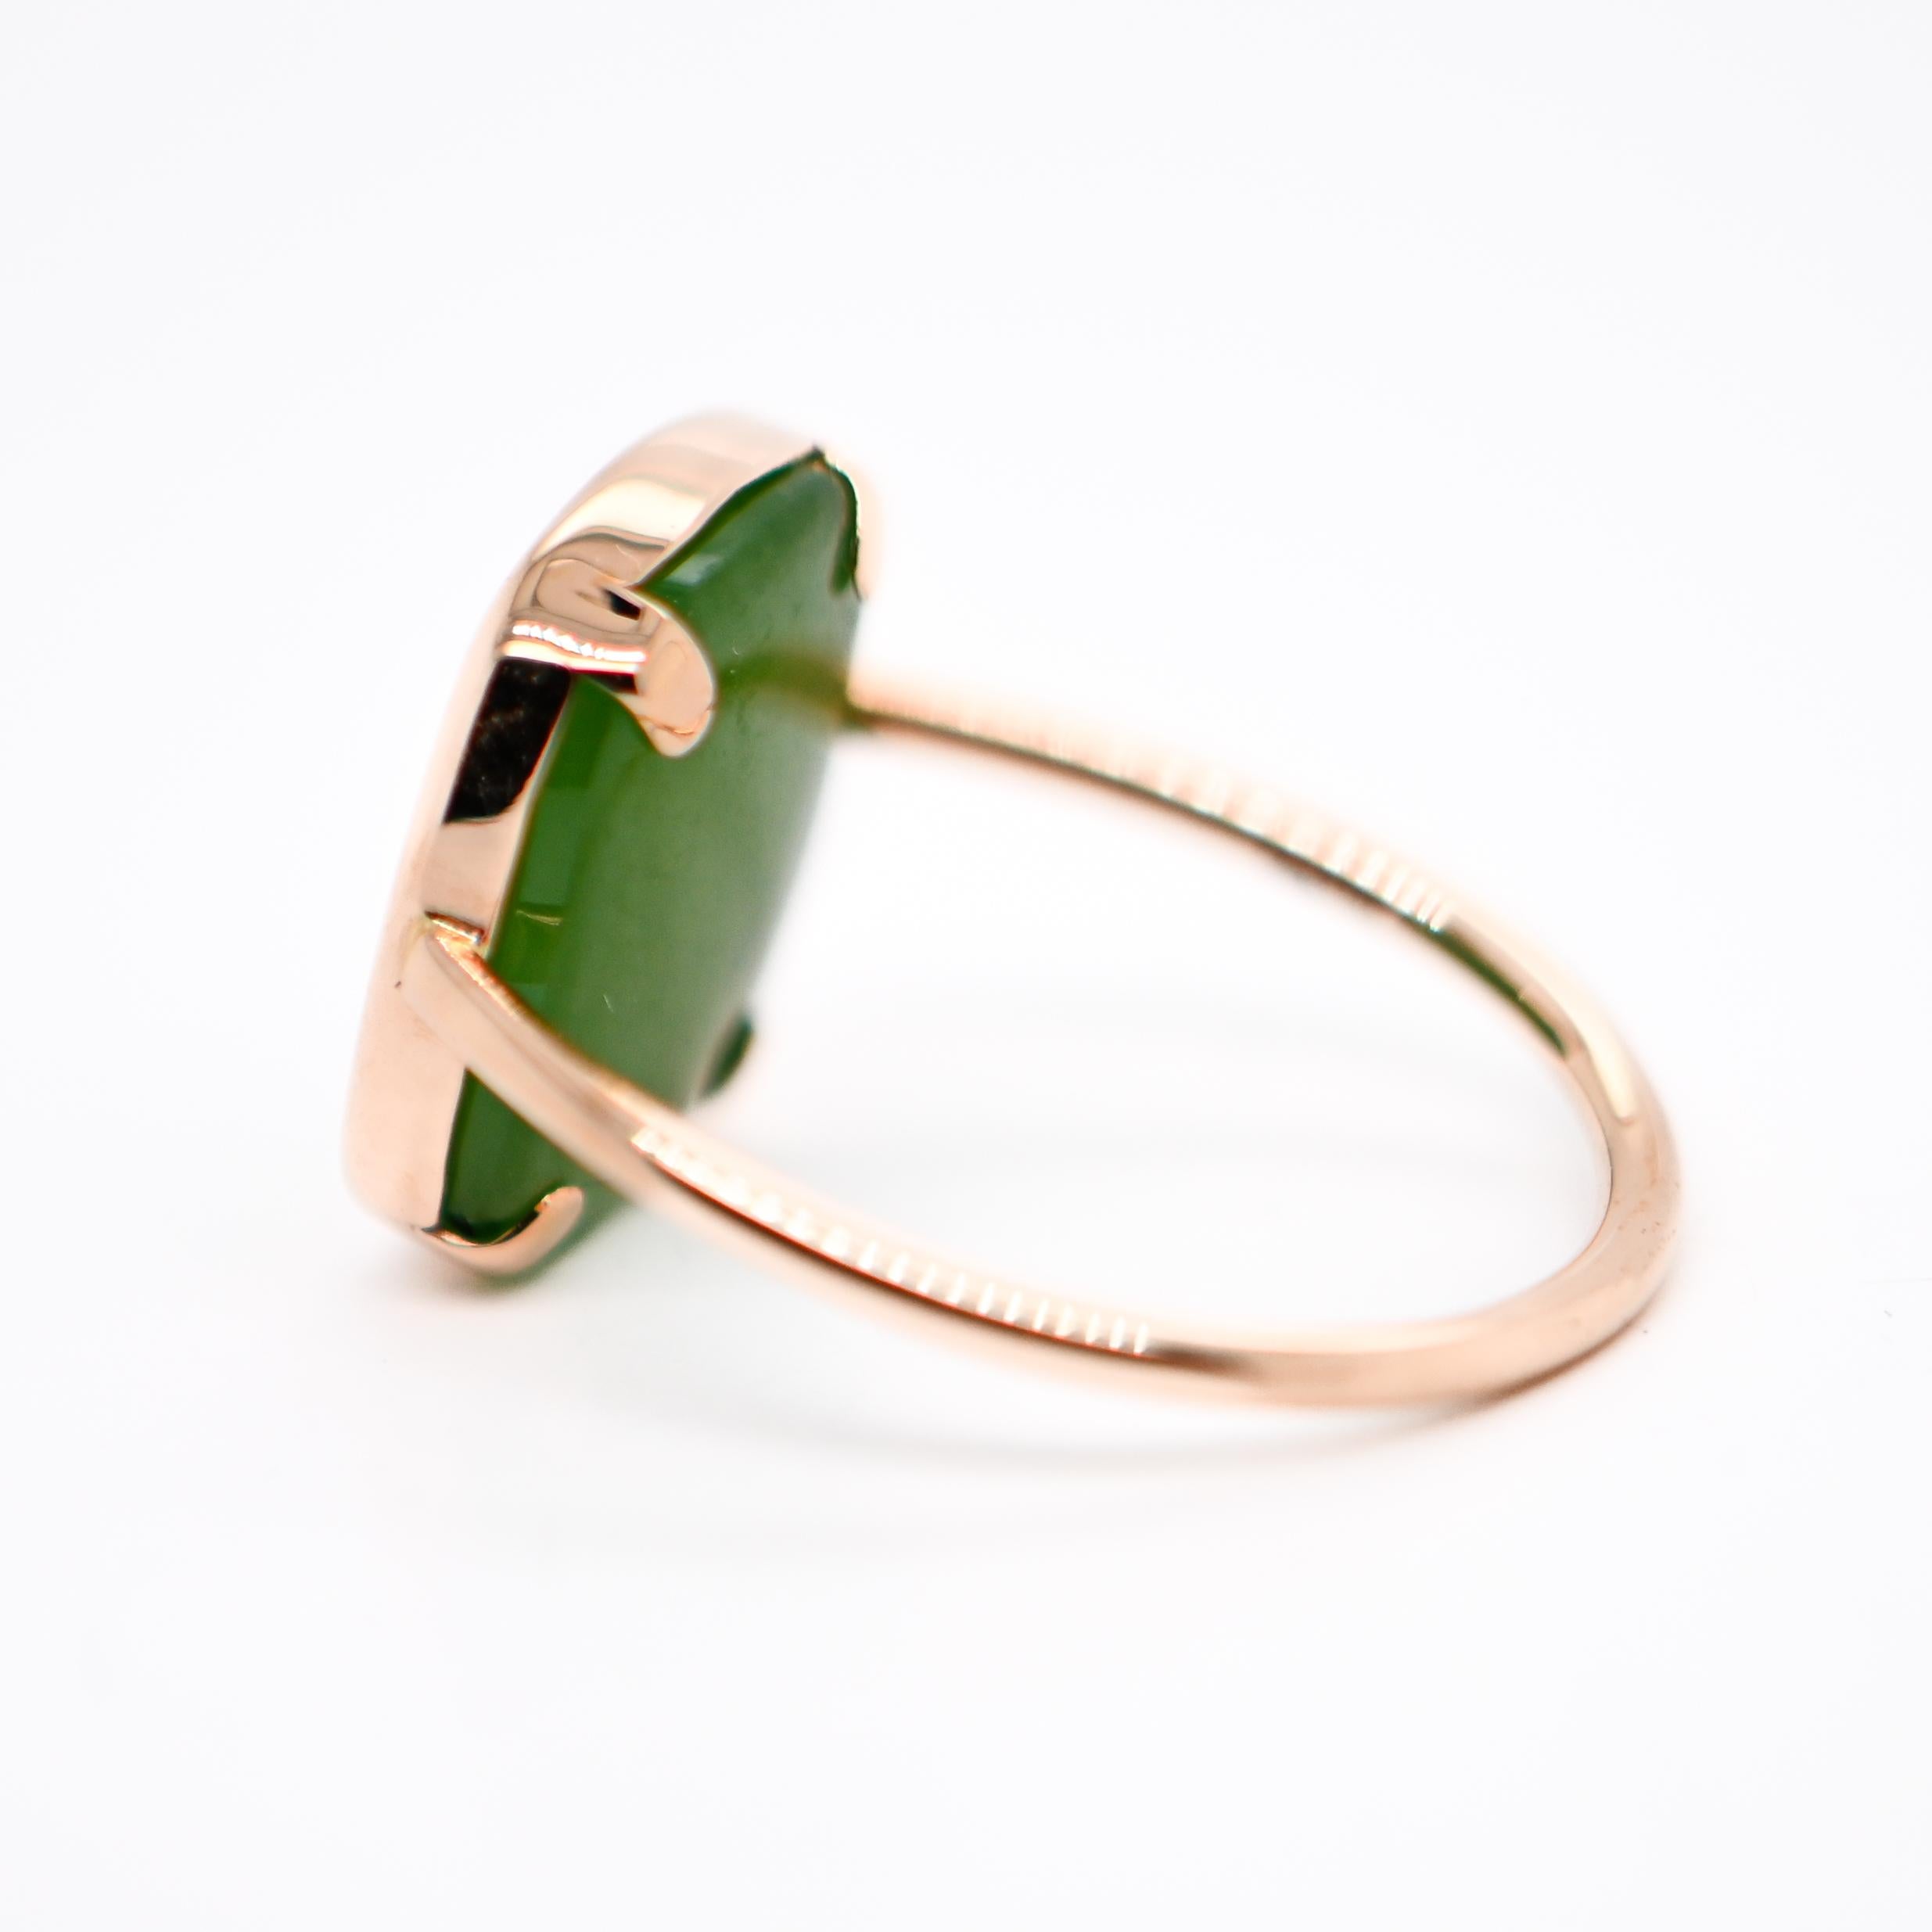 Discover this beautiful fashionable and modern rose gold ring, which embodies both timeless elegance and a contemporary touch. Mounted with a precious treasure of nature, a jade stone of rare beauty, this ring is the perfect marriage between luxury